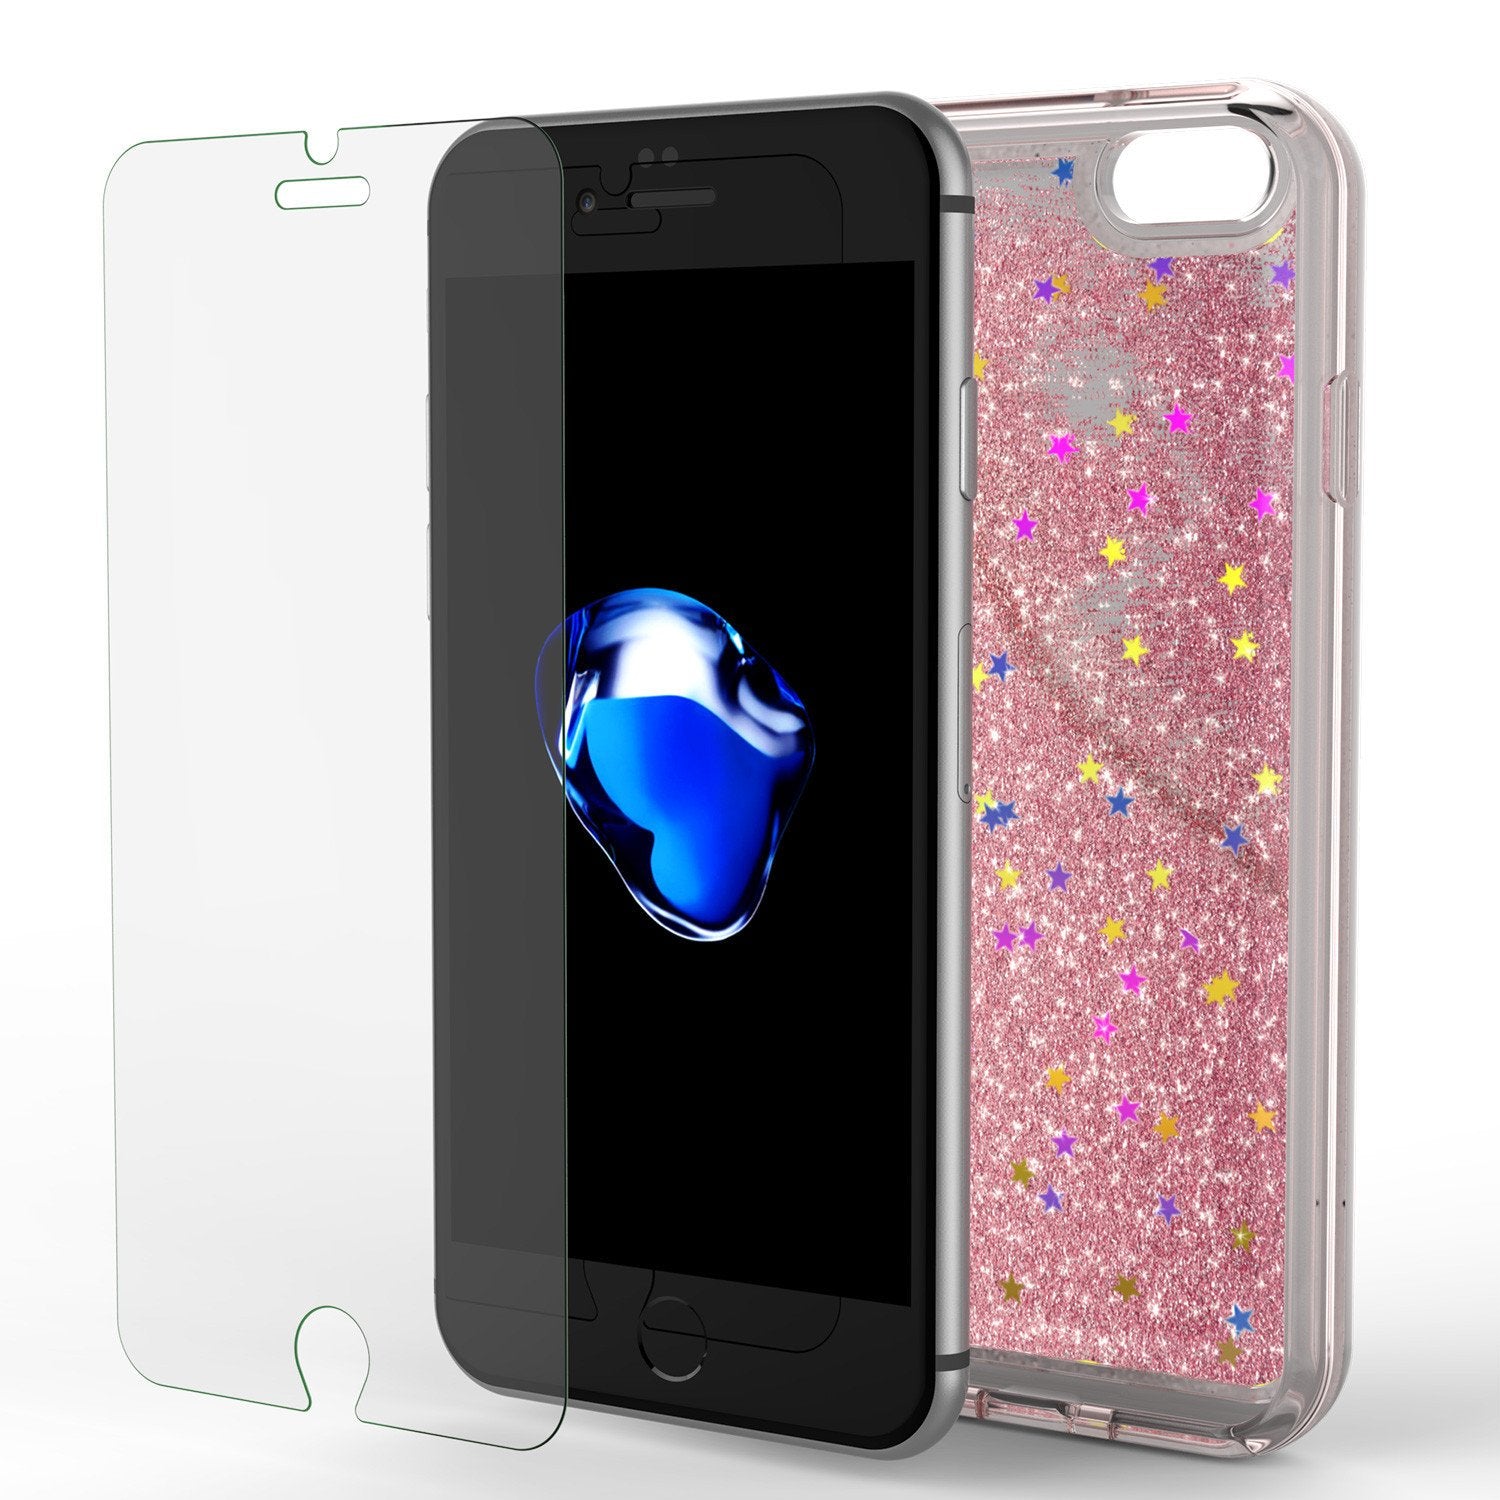 iPhone 7 Case, Punkcase [Liquid Rose Series] Protective Dual Layer Floating Glitter Cover with lots of Bling & Sparkle + 0.3mm Tempered Glass Screen Protector for Apple iPhone 7s